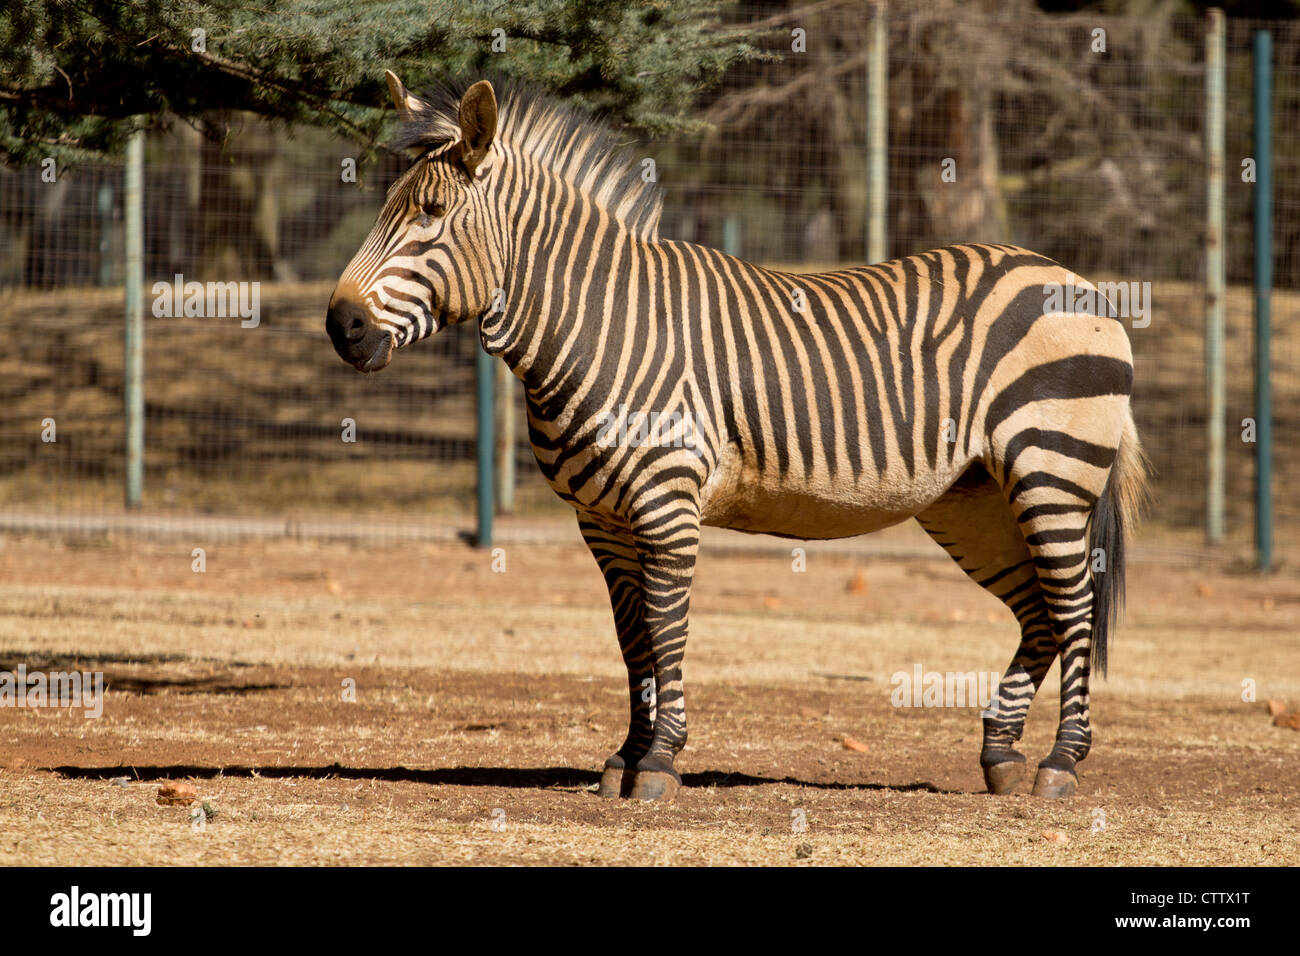 A zebra stading tall in a park in South Africa Stock Photo